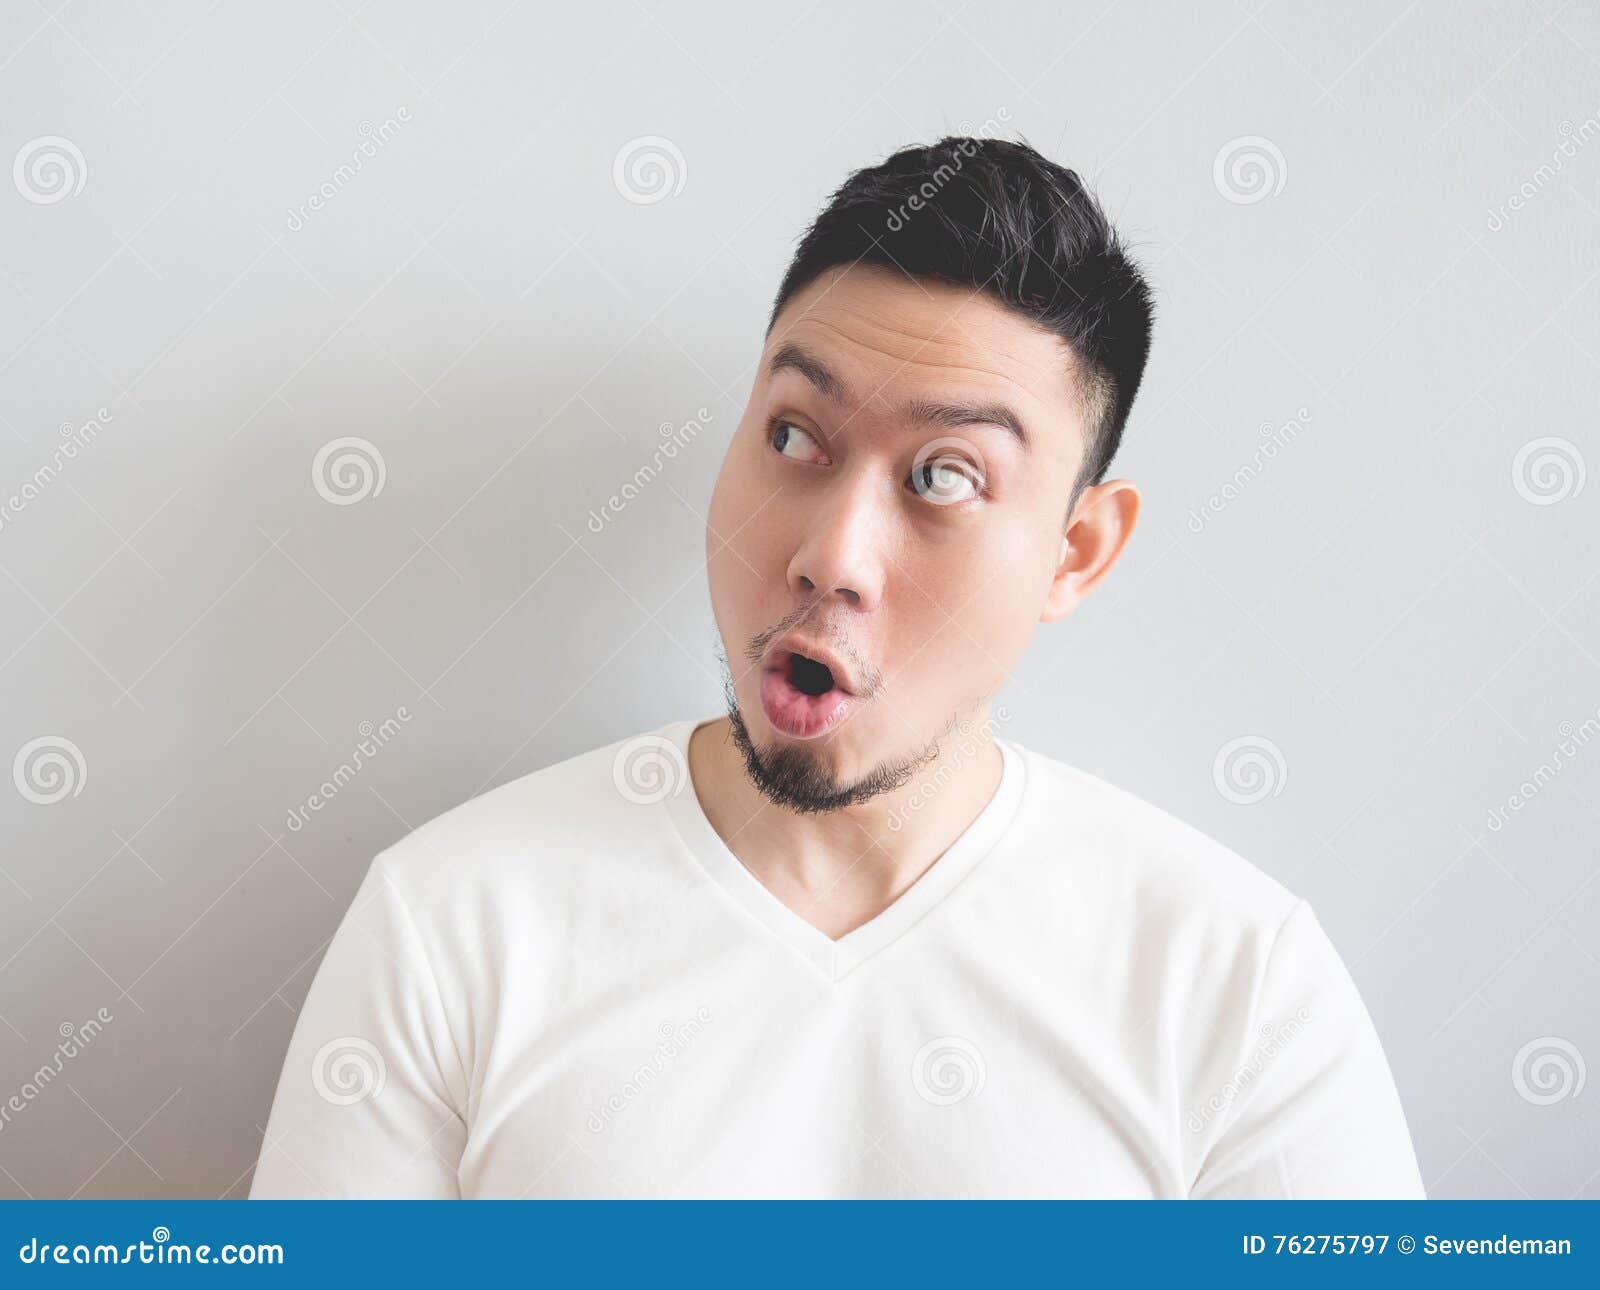 Man with Funny Shocked Face. Stock Image - Image of attractive, asia